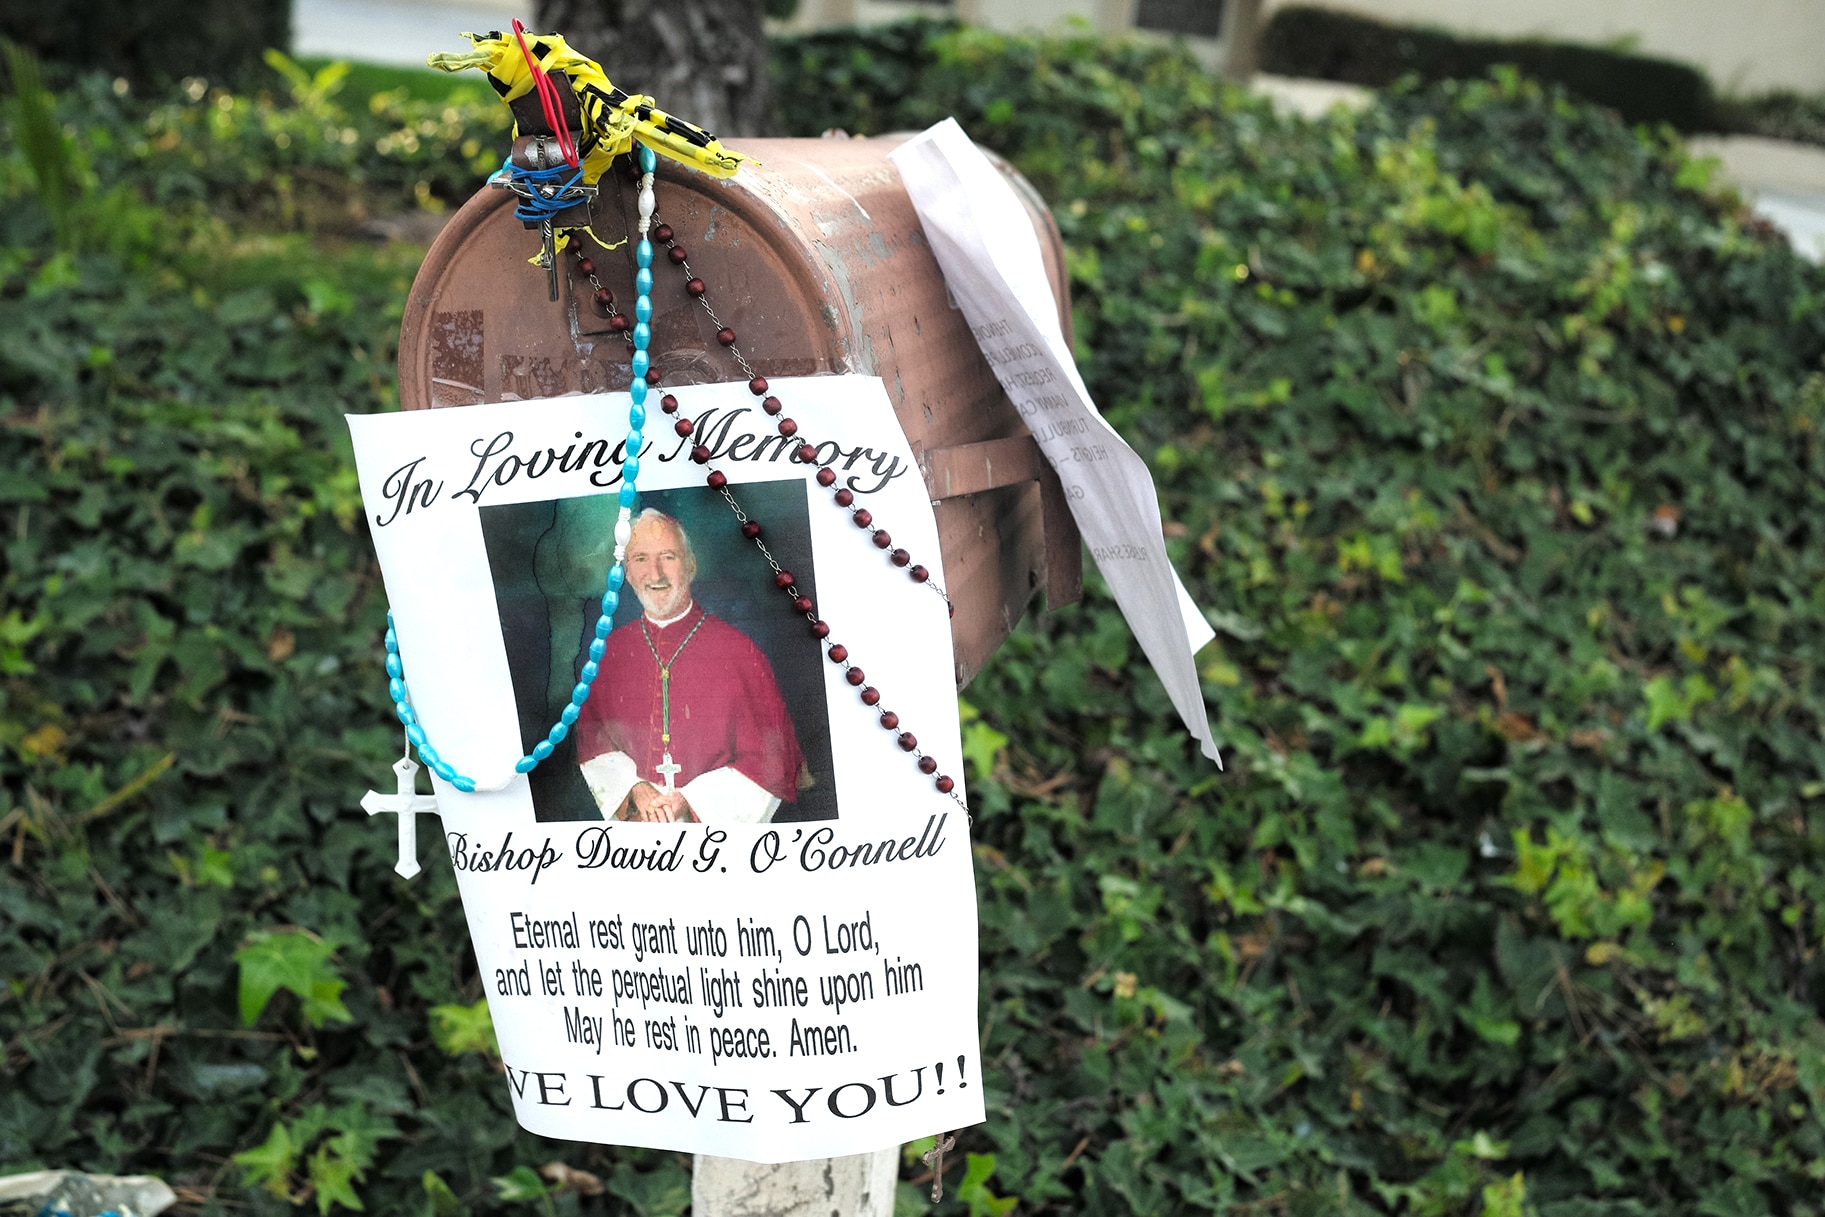 a makeshift memorial for Bishop David G. O'Connell